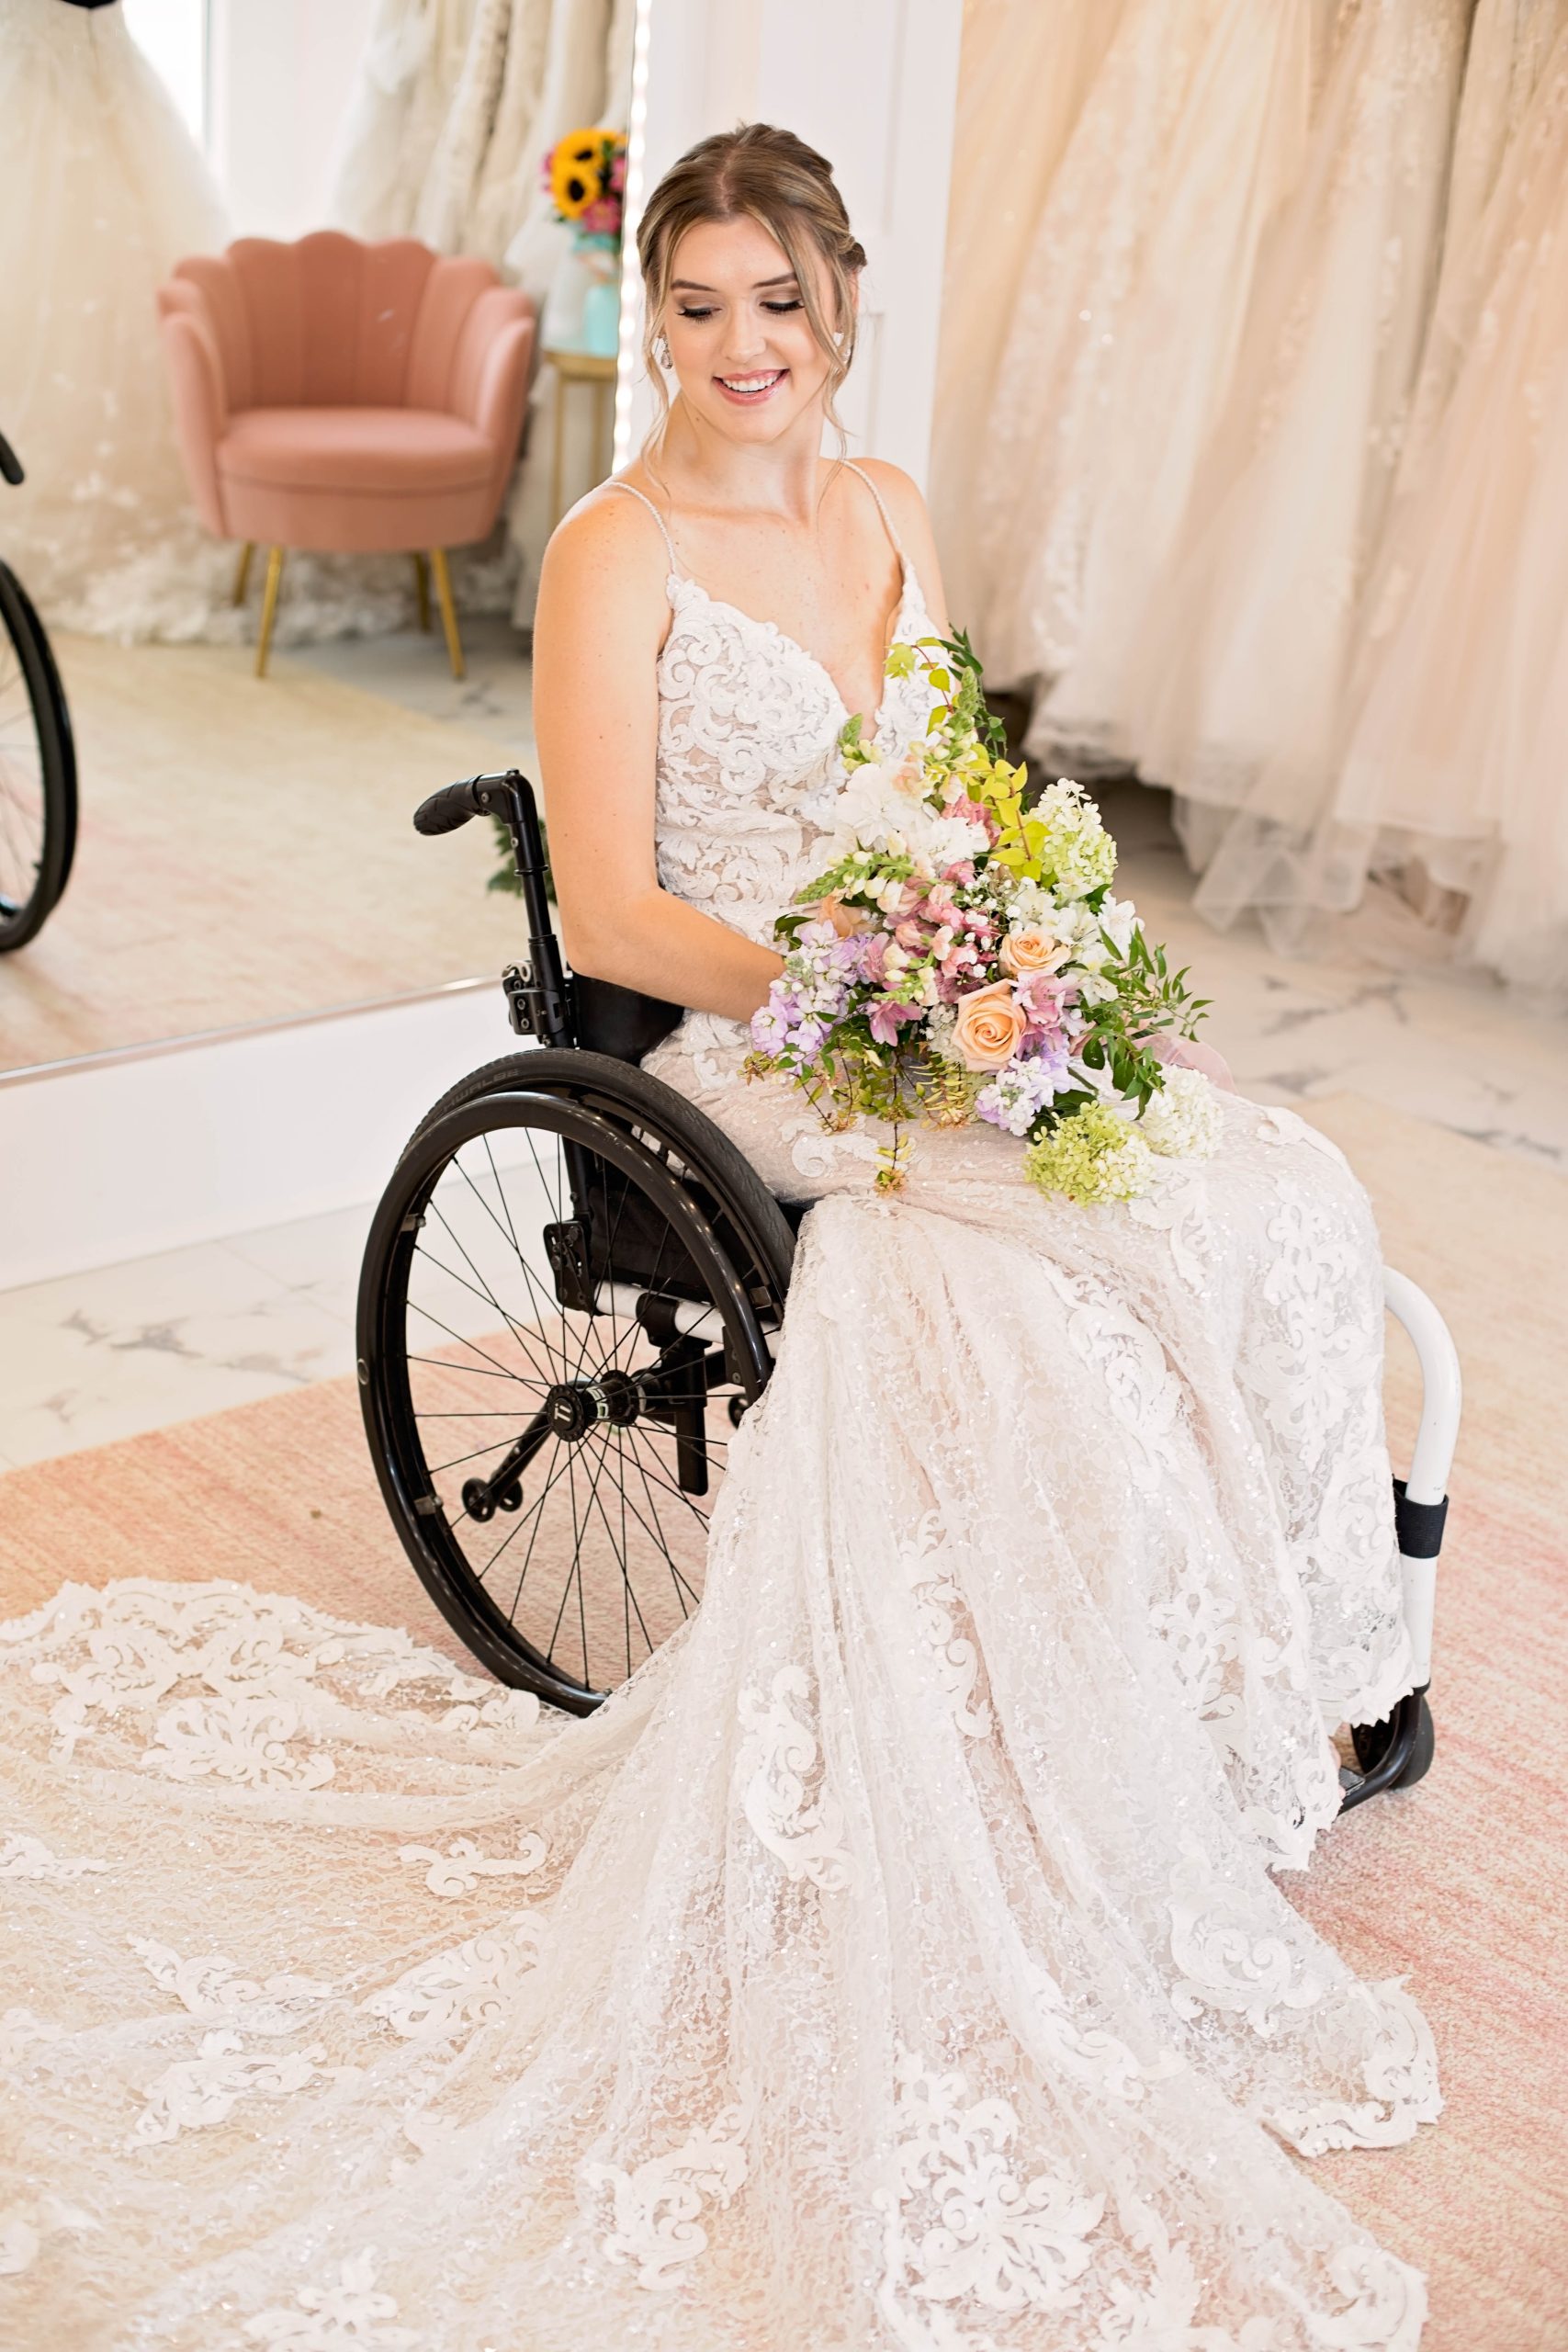 Bride In Wheelchair Wearing Wedding Dress Called Tuscany Royale By Maggie Sottero For All Bodies All Brides